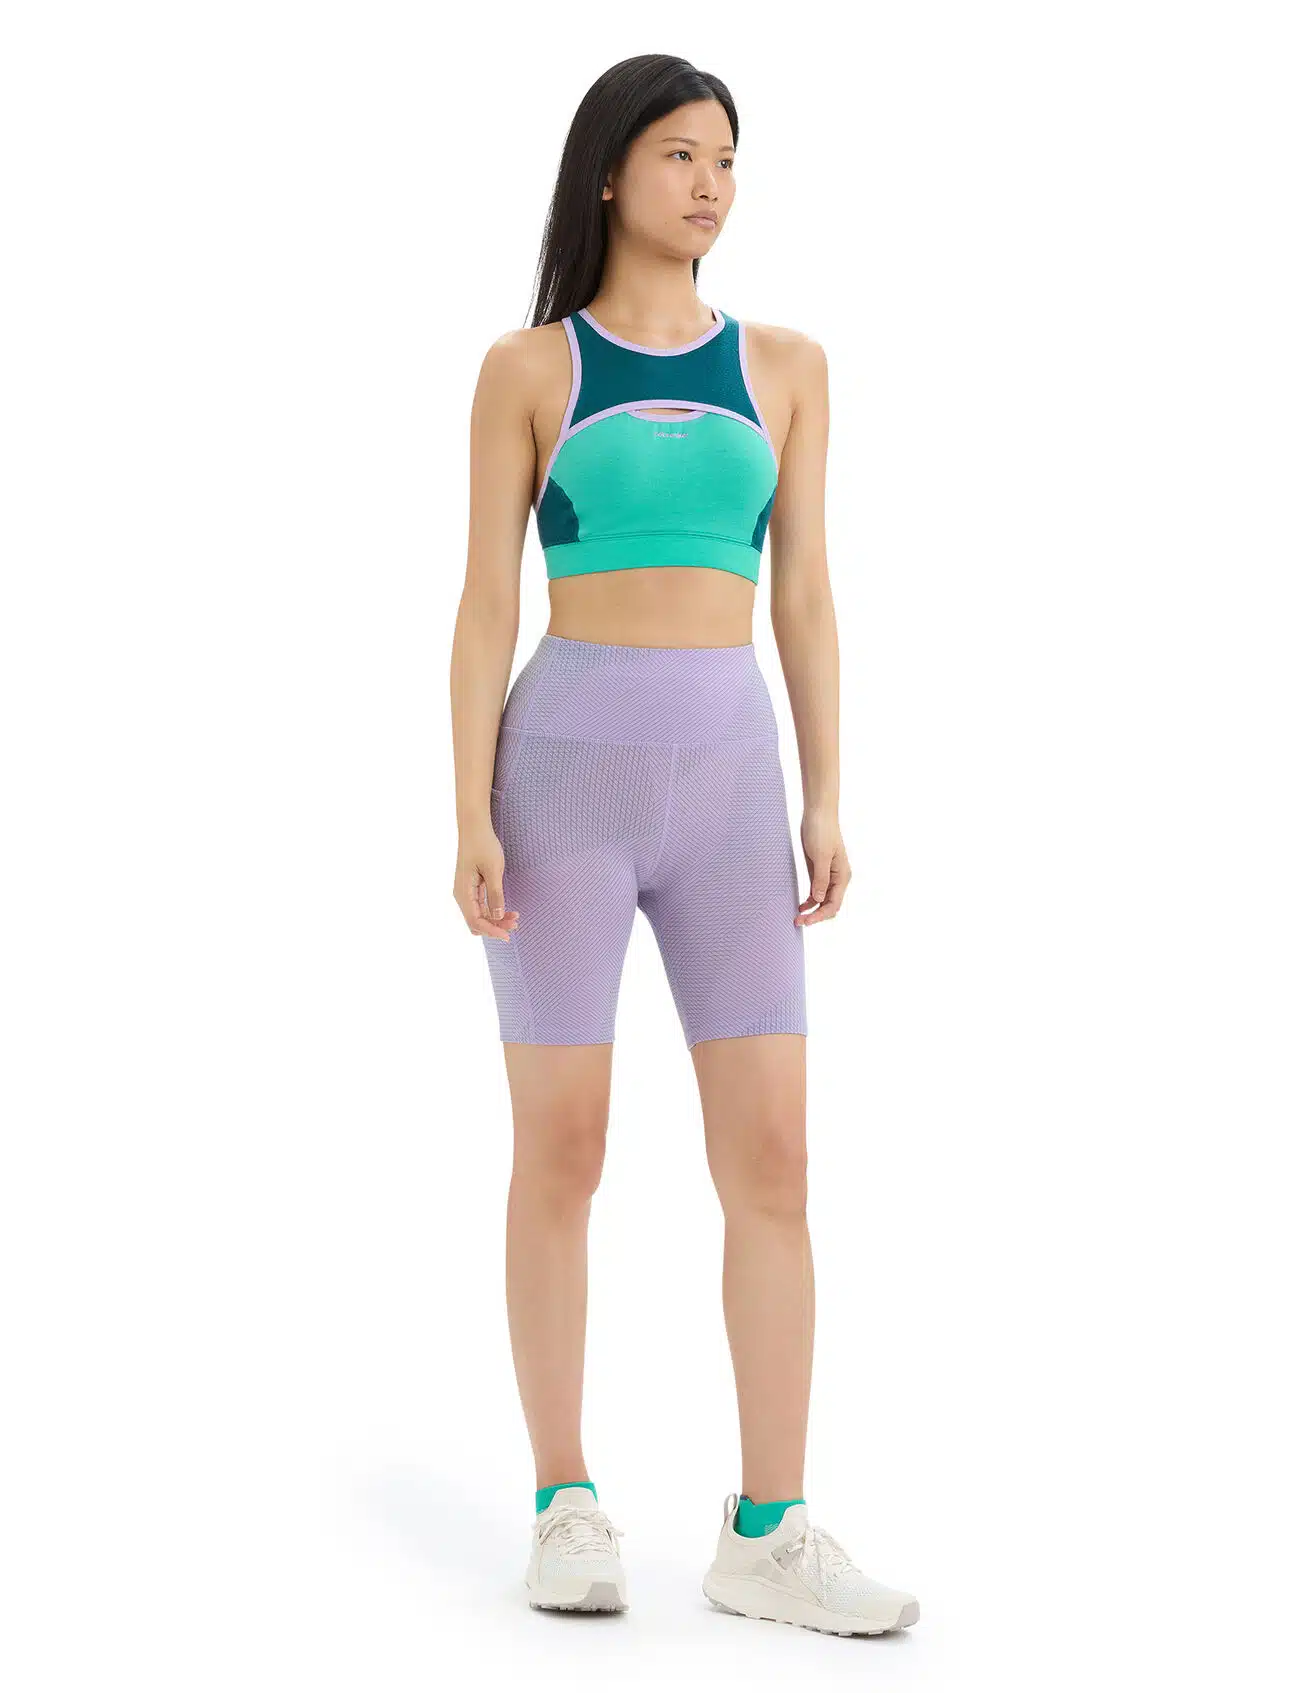 Non-Toxic Yoga Pants That Don't Make Me Itch - Ecocult®